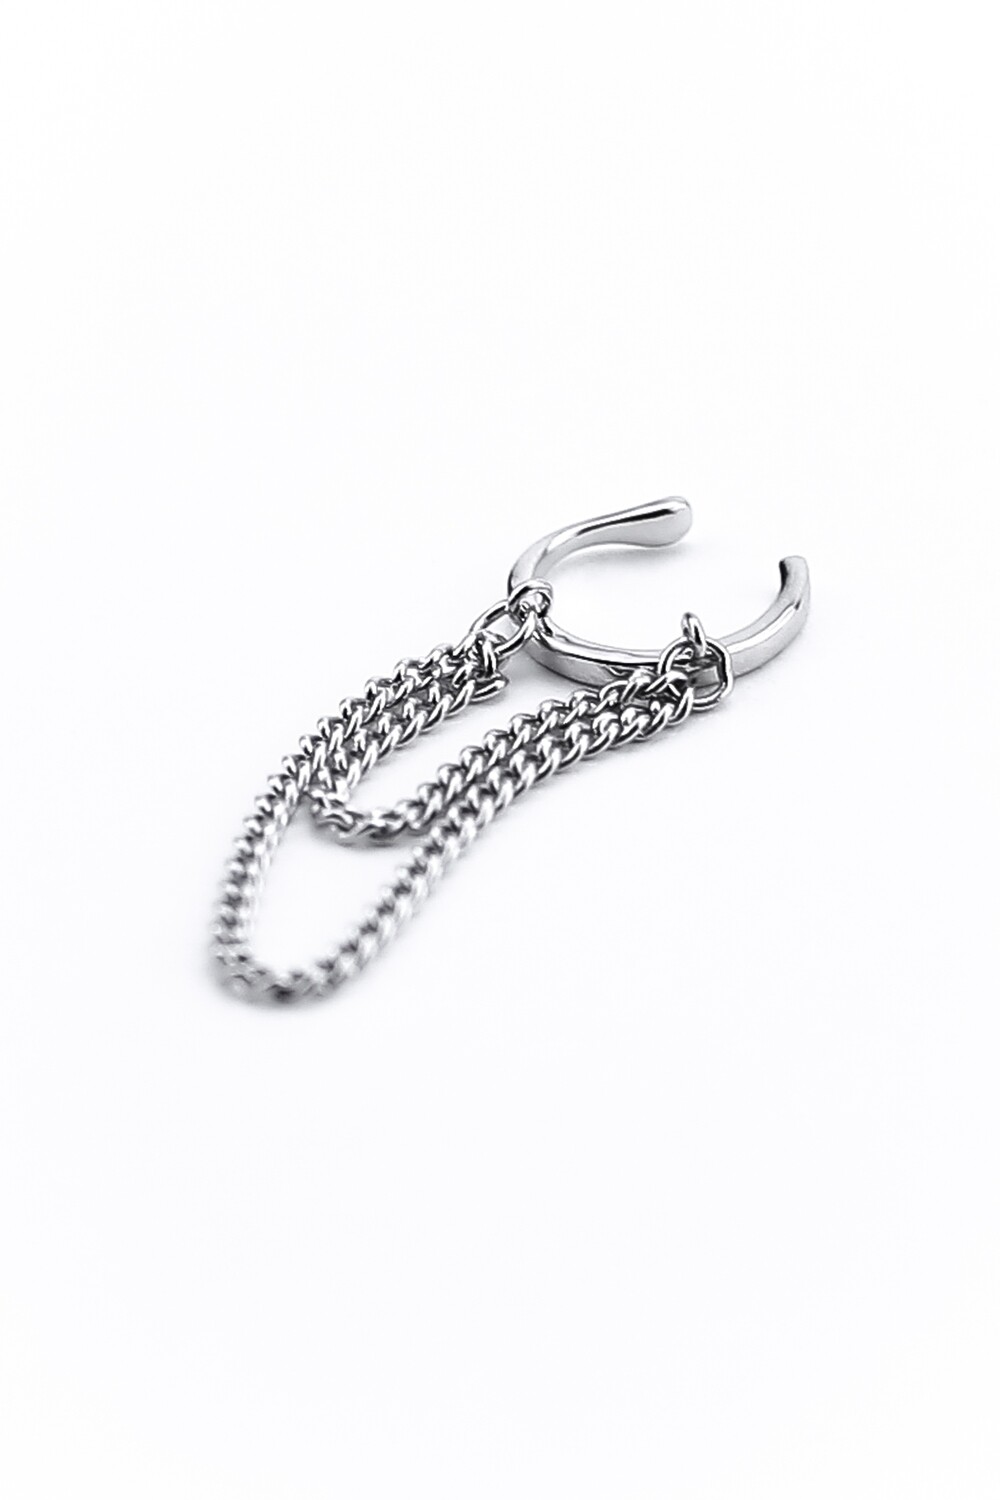 Thin huggy earring with thin chains